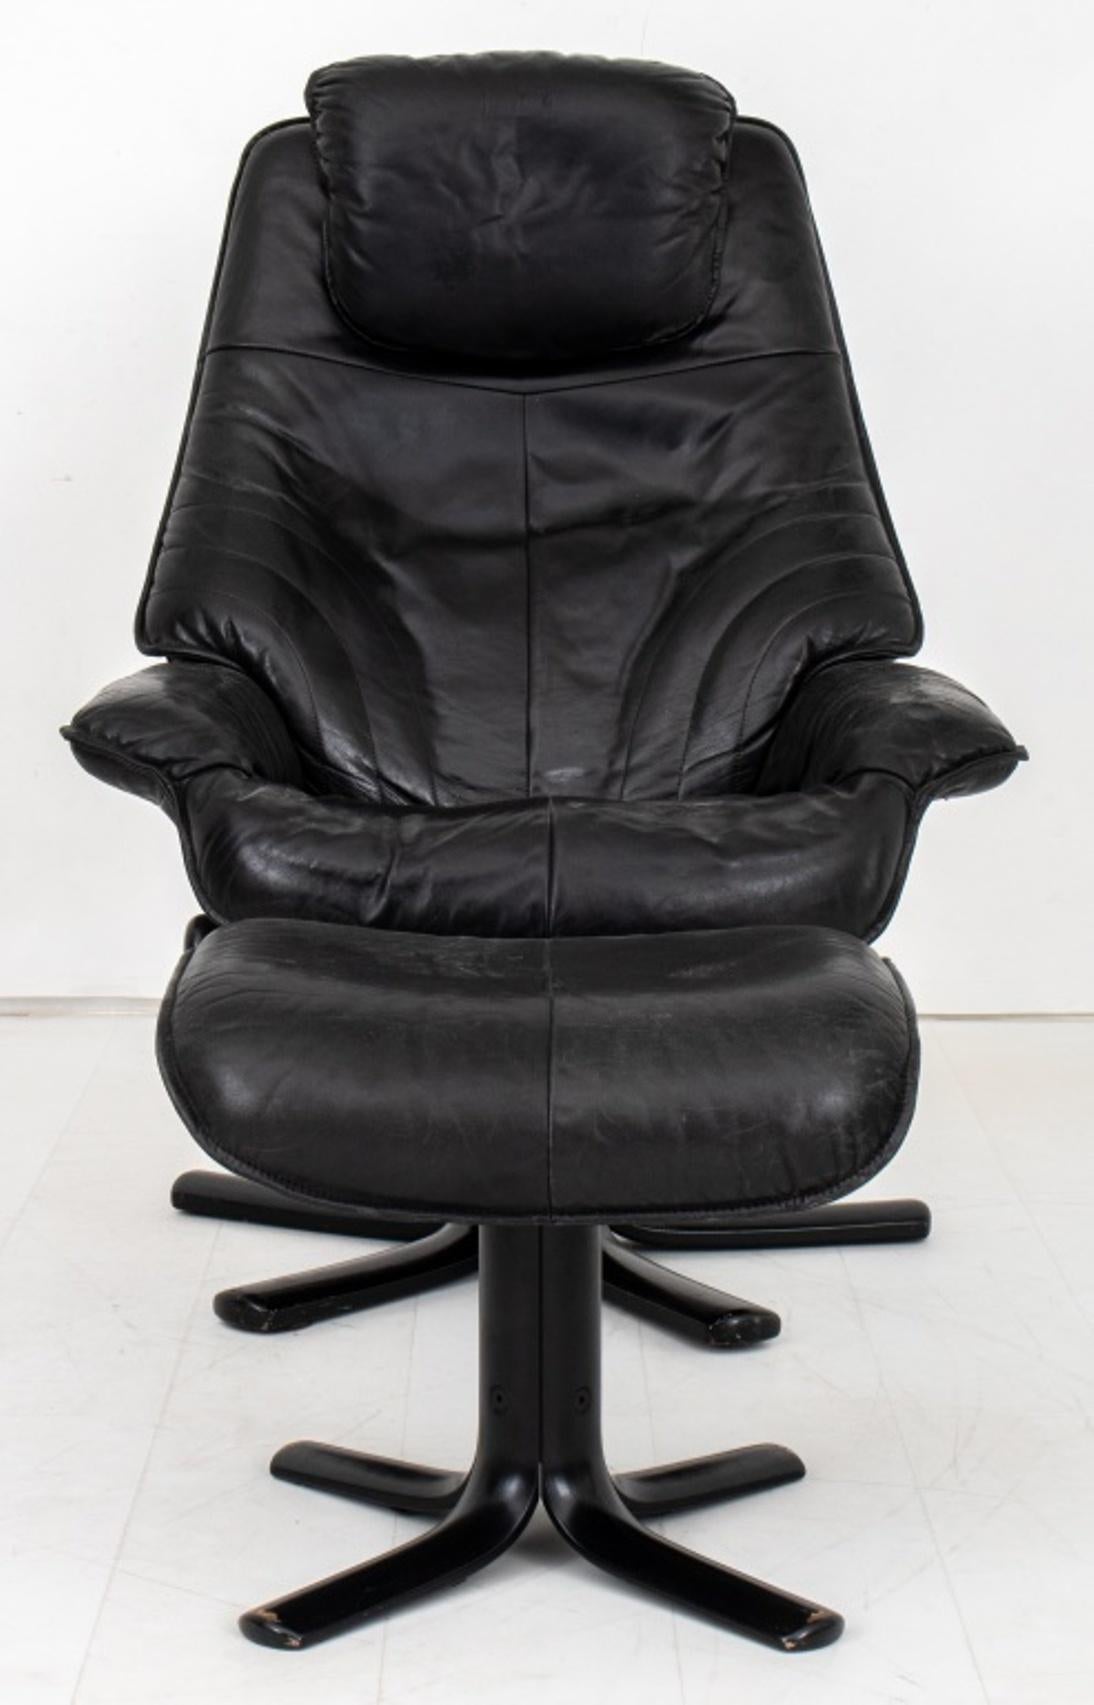 Danish modern black leather chair and ottoman, with upholstered seat and arms, above a five footed star base.
Dimensions: 42